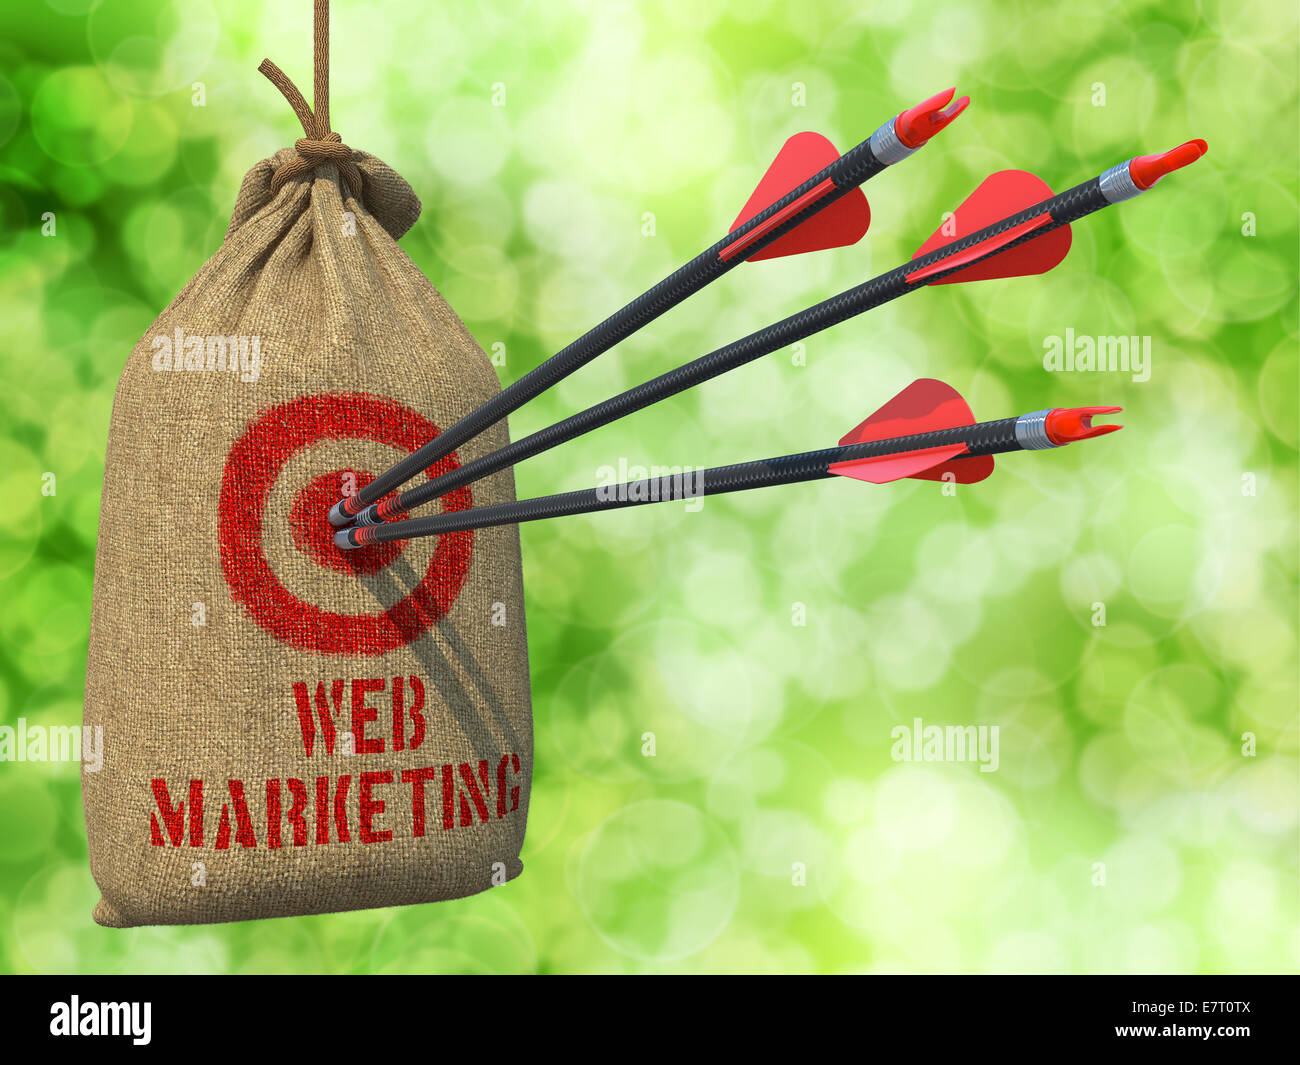 Web Marketing - Arrows Hit in Red Target. Stock Photo